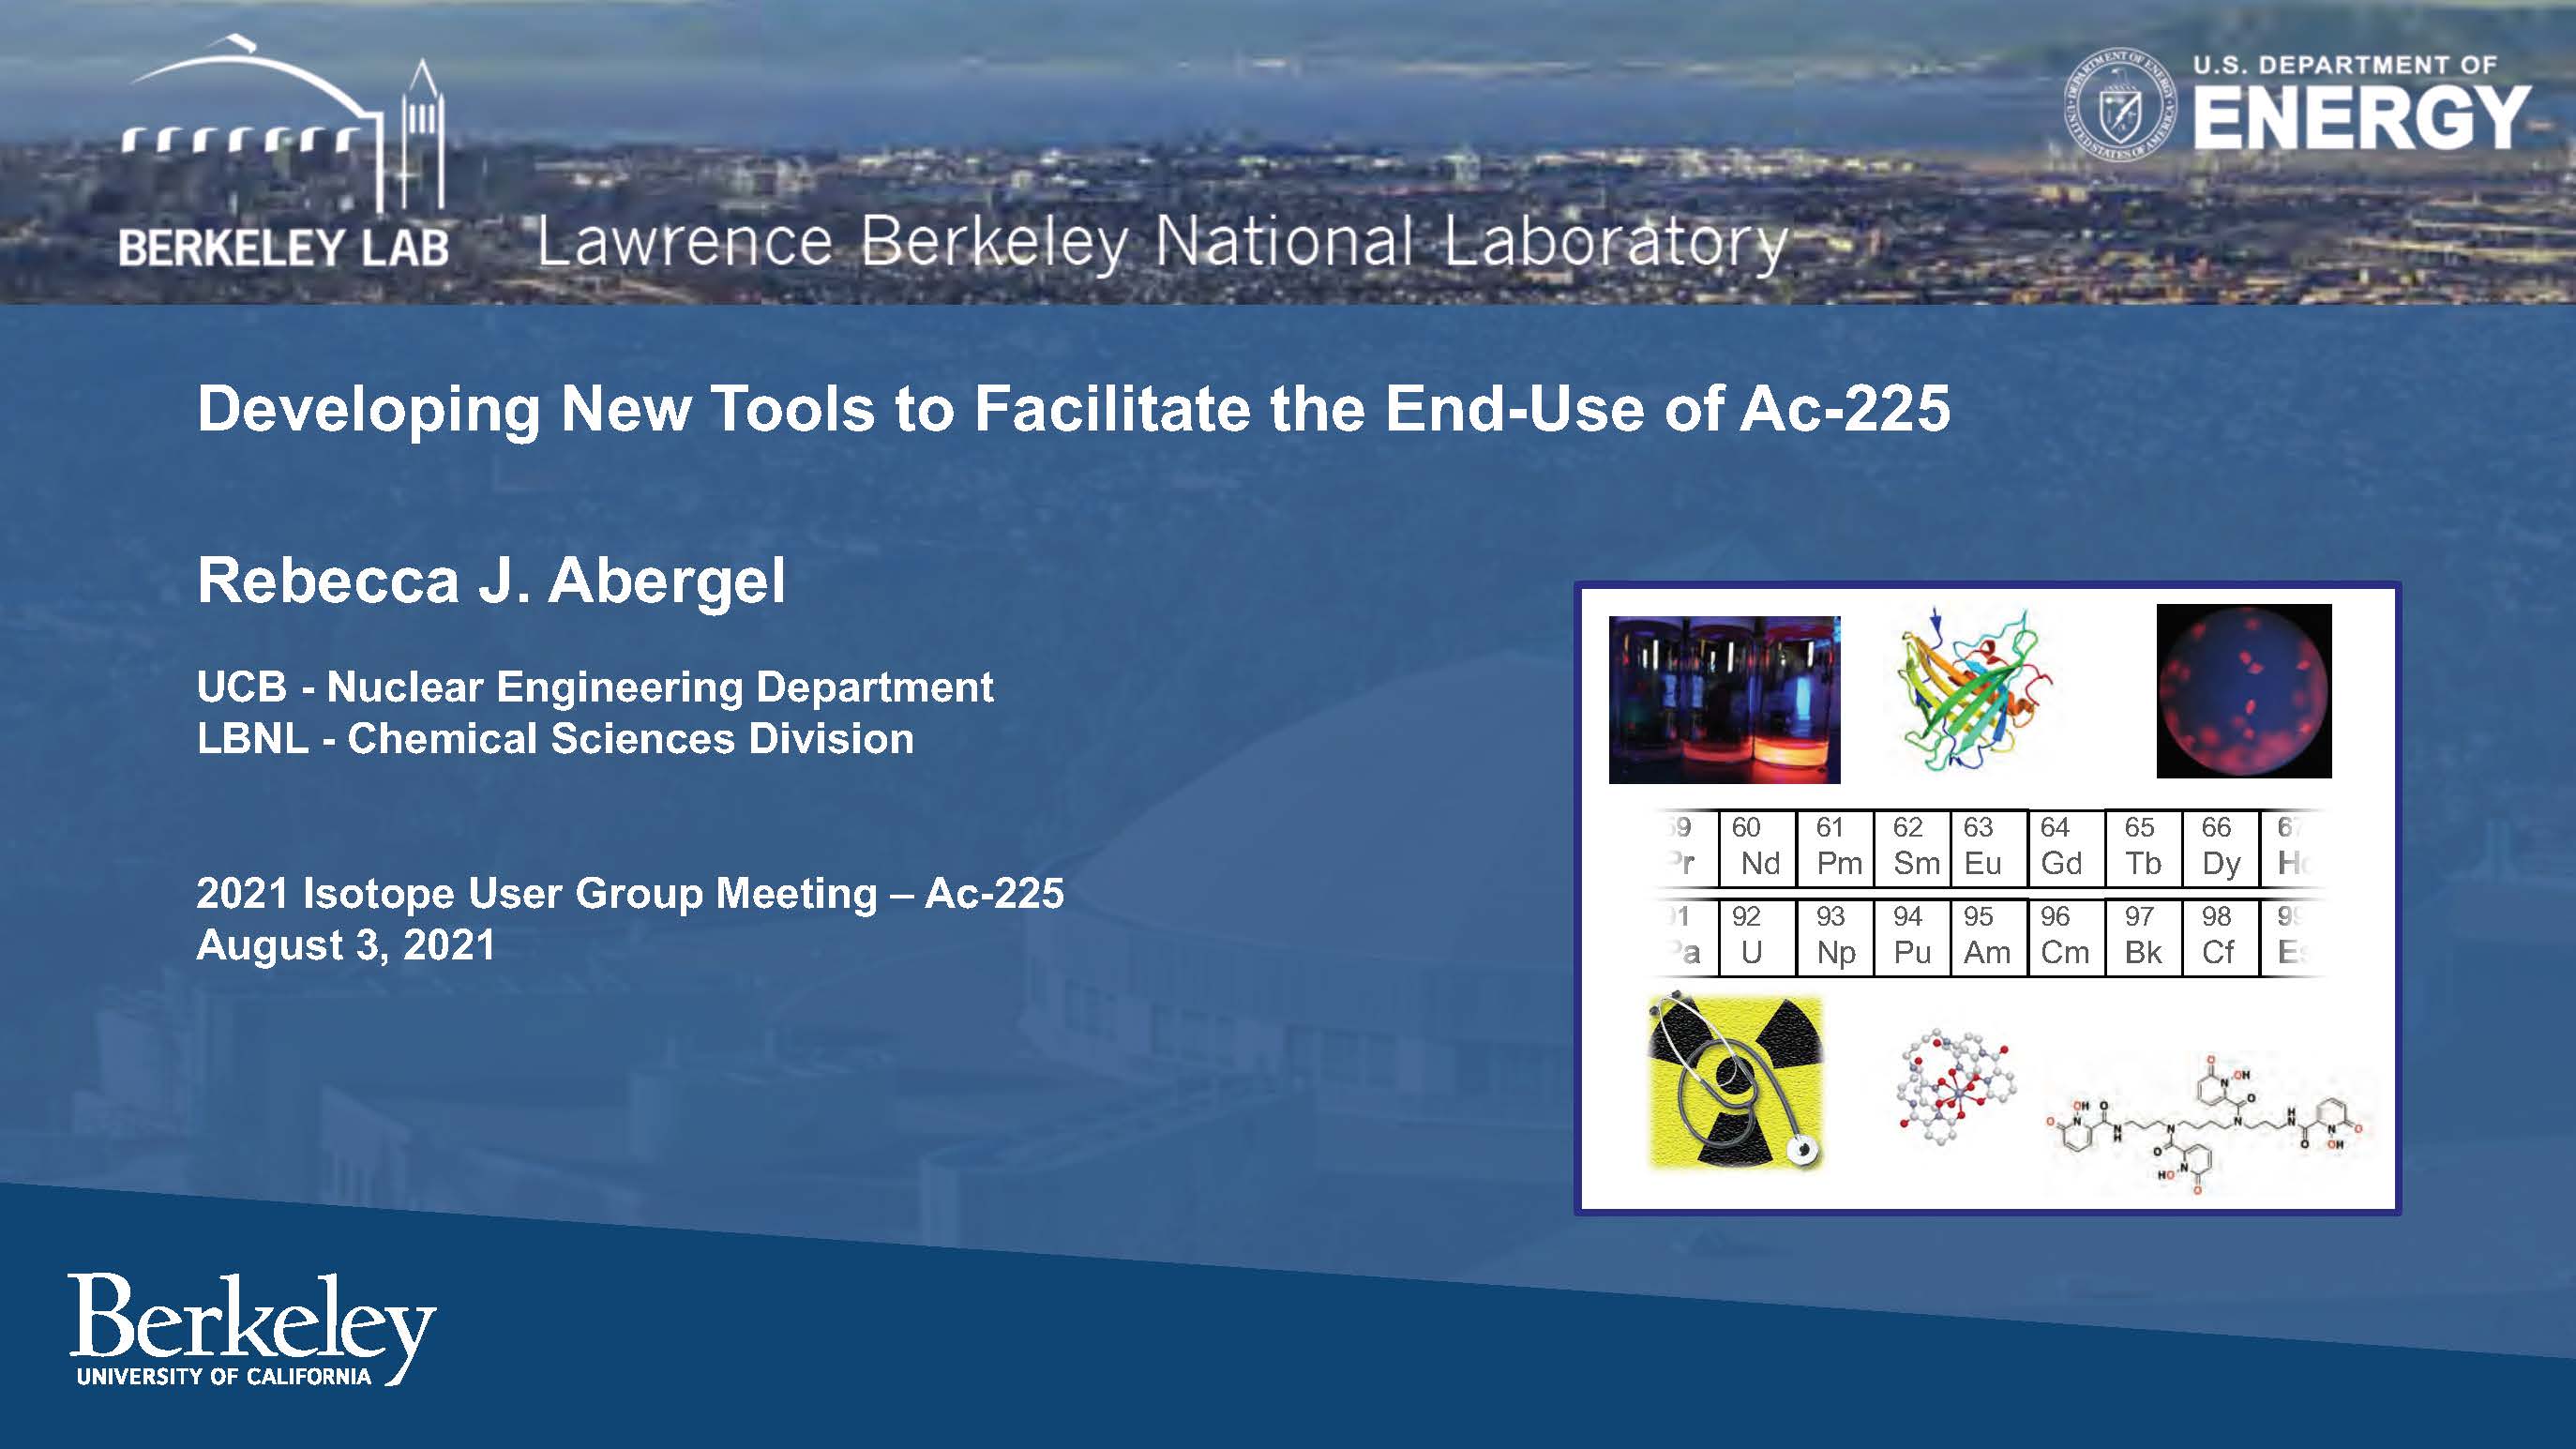 Developing New Tools to Facilitate the End-Use of Ac-225 by Dr. Rebecca Abergel, the University of California at Berkeley